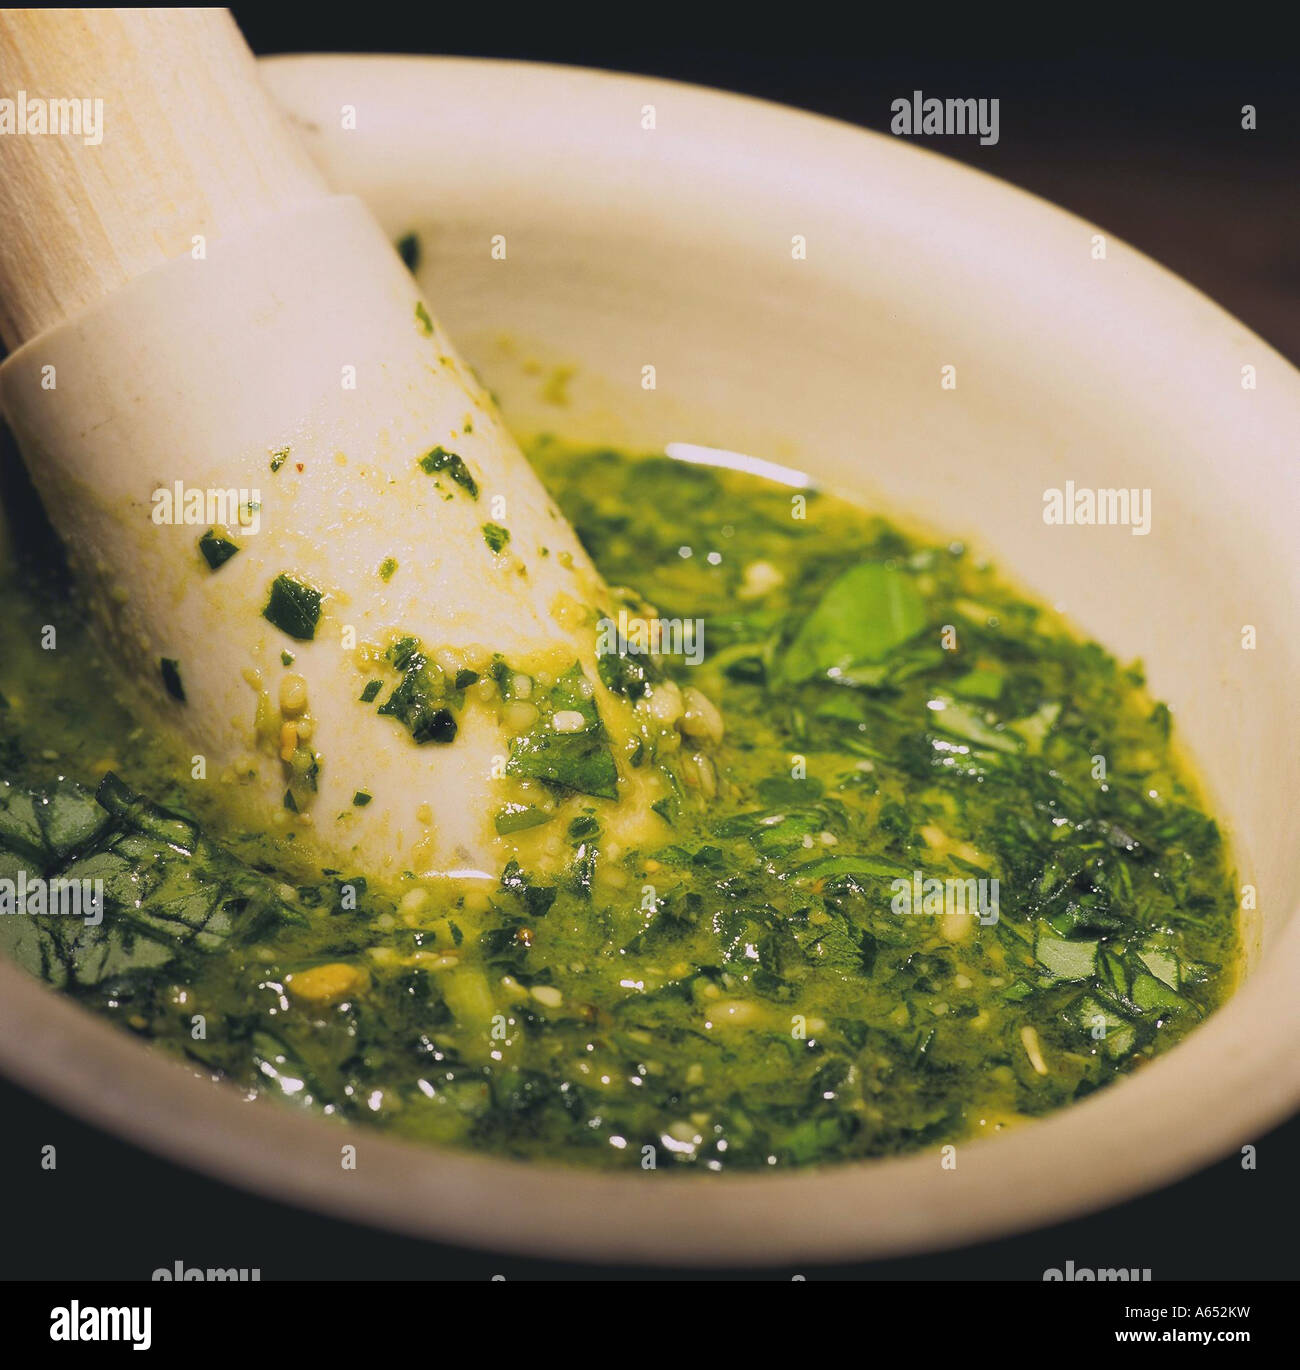 Parsley Pesto Made in Marble Mortar, Dishes